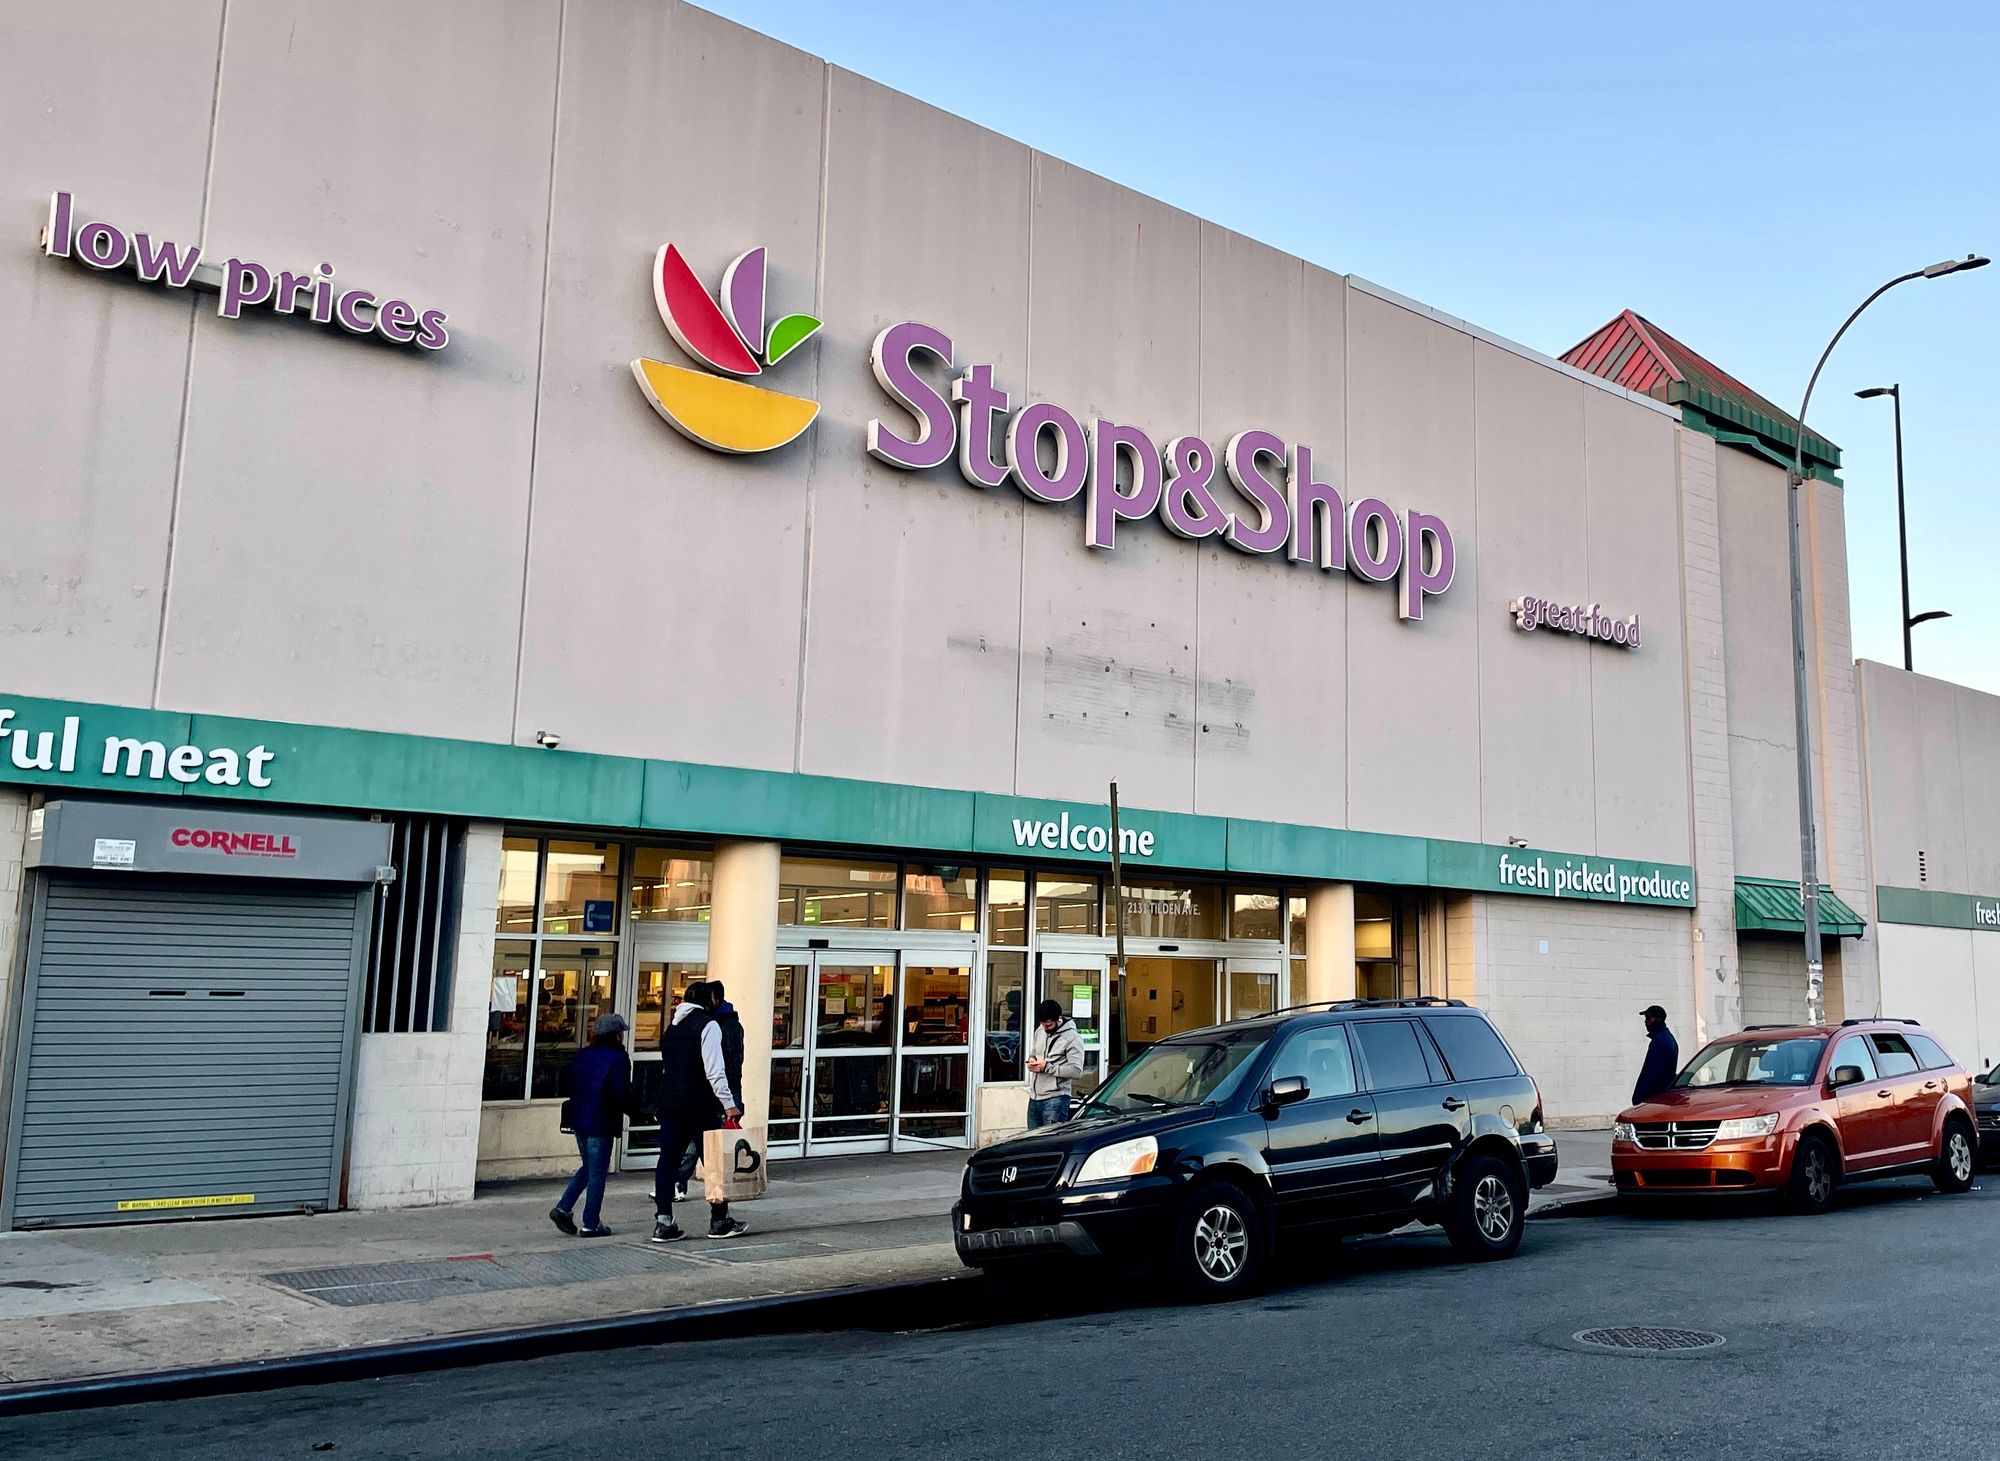 Flatbush Stop & Shop to close, leaving residents concerned about lack of affordable groceries